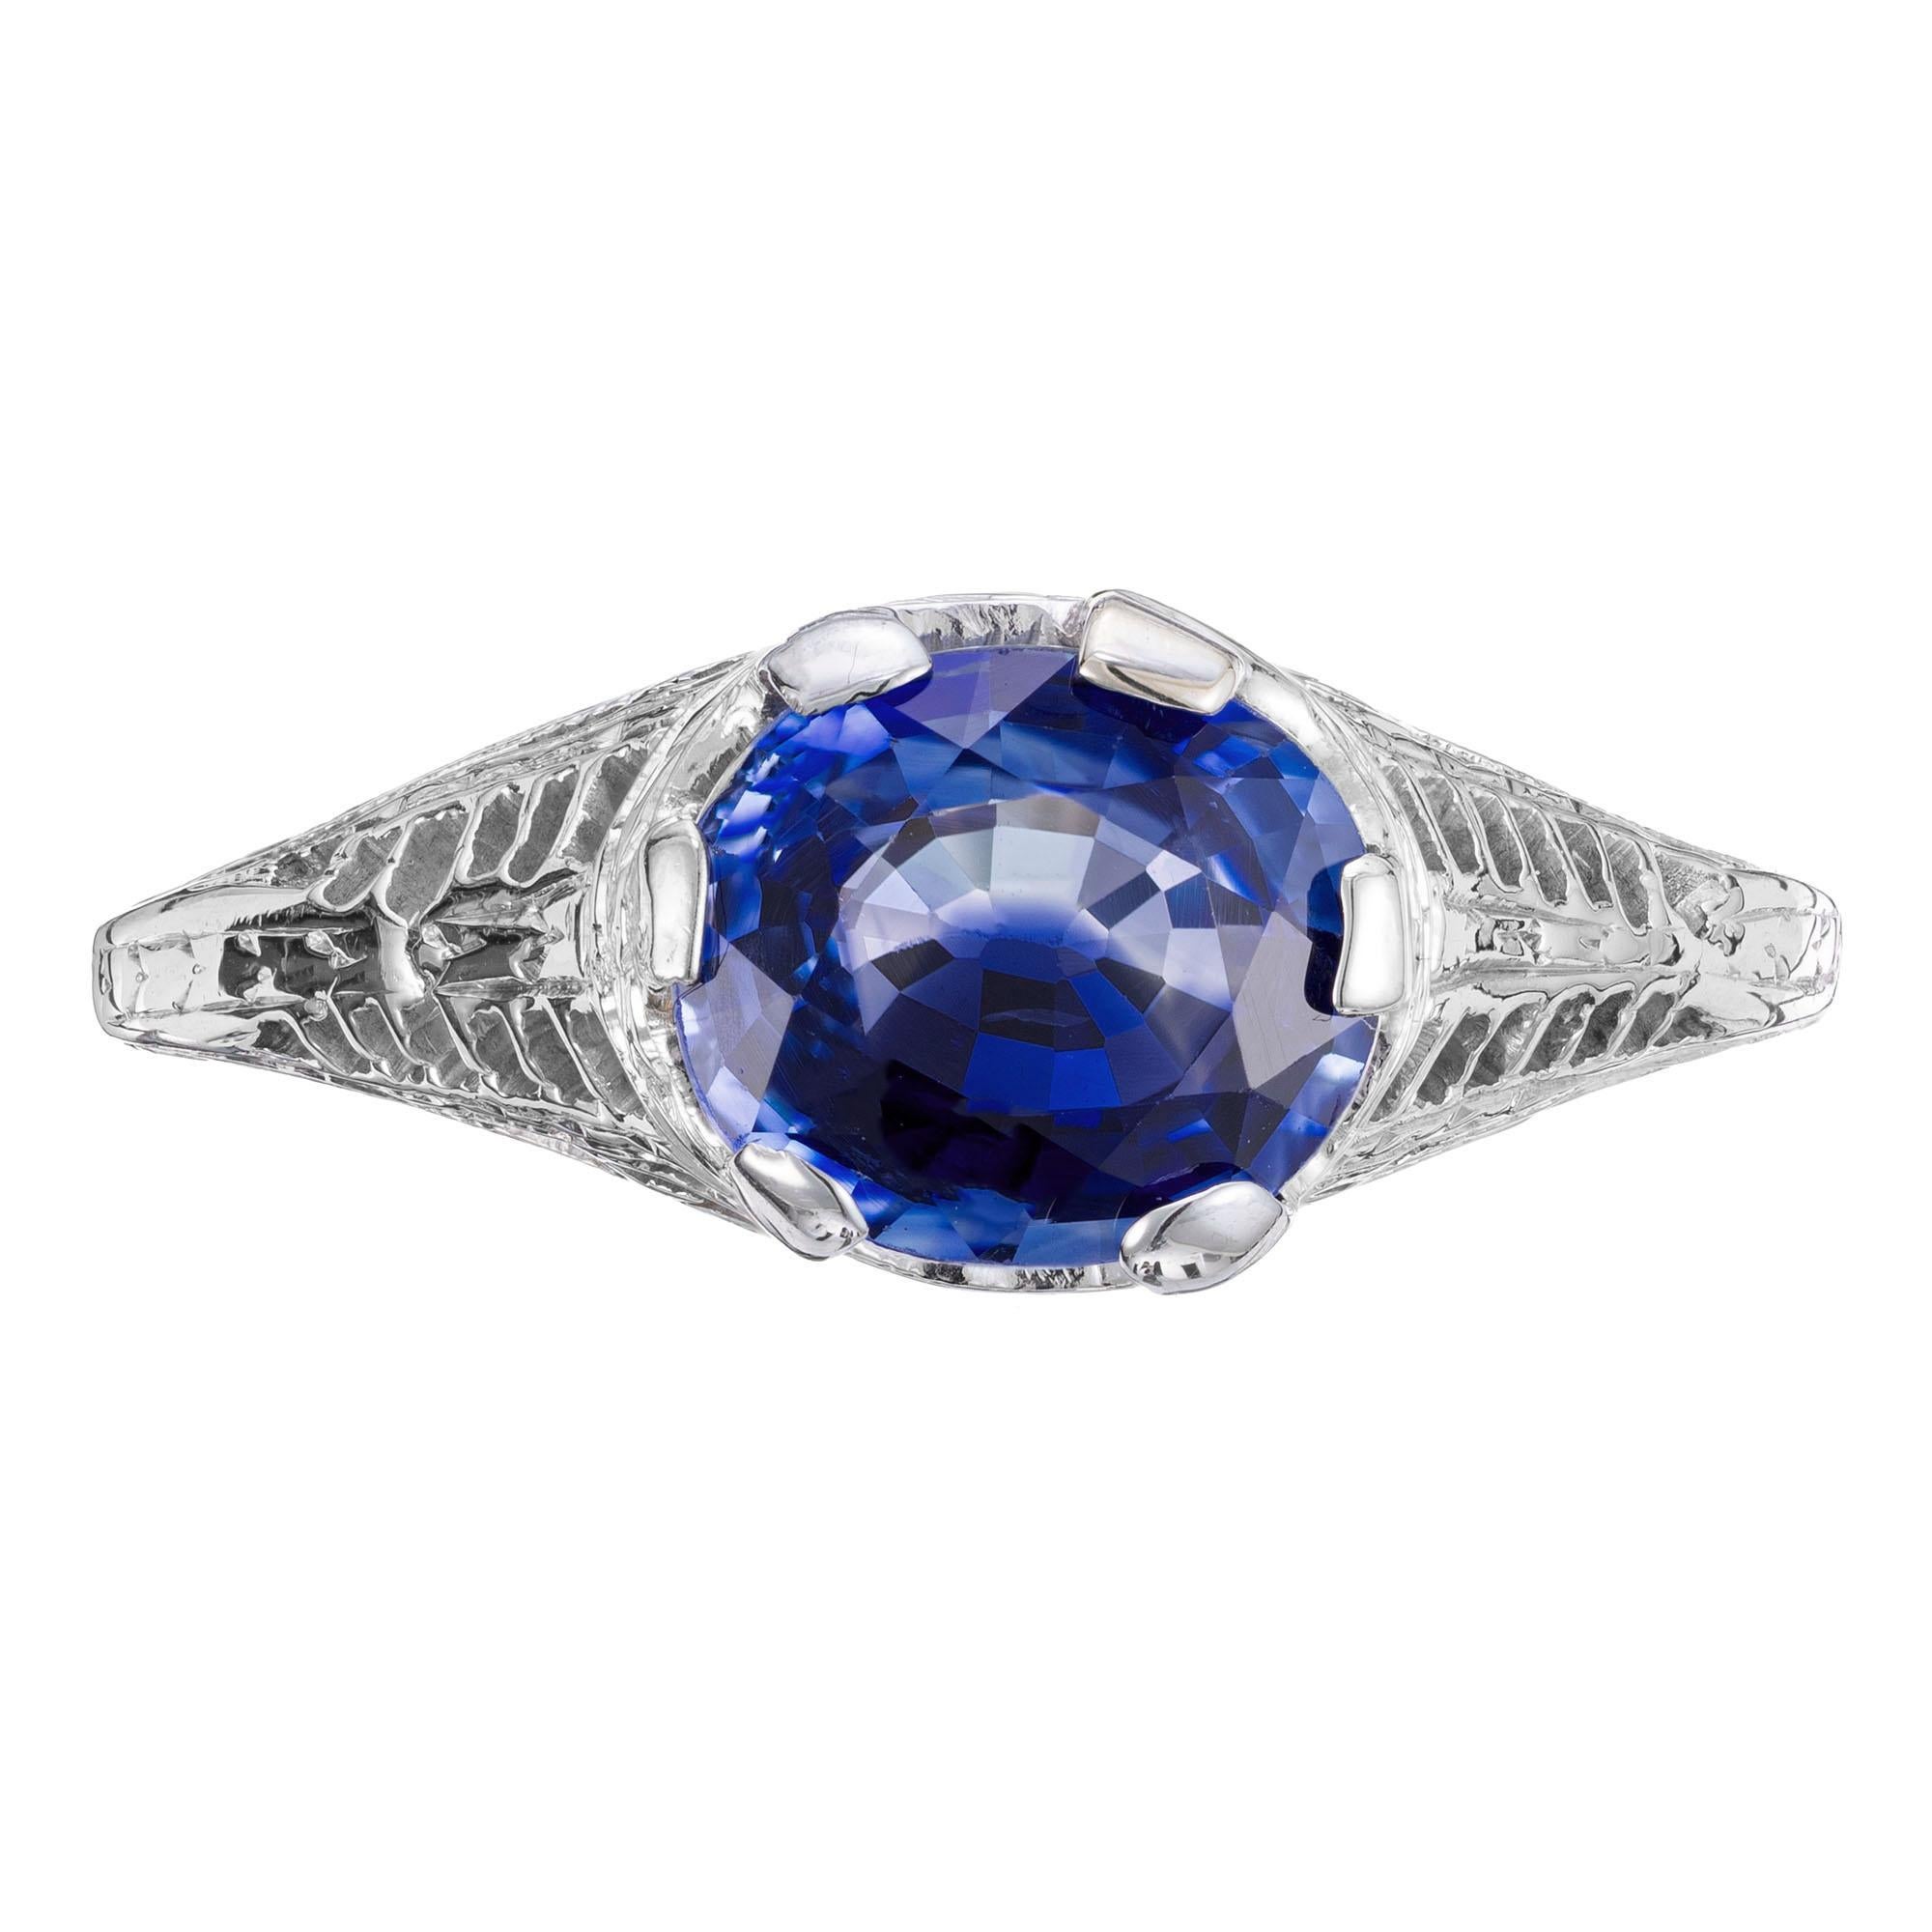 1930's oval sapphire engagement ring. GIA certified oval, side mounted rich deep blue sapphire in a  14k white gold filigree Art Deco setting. The Sapphire is 1.29ct, natural color, simple heat only. The GIA certified this as natural with only